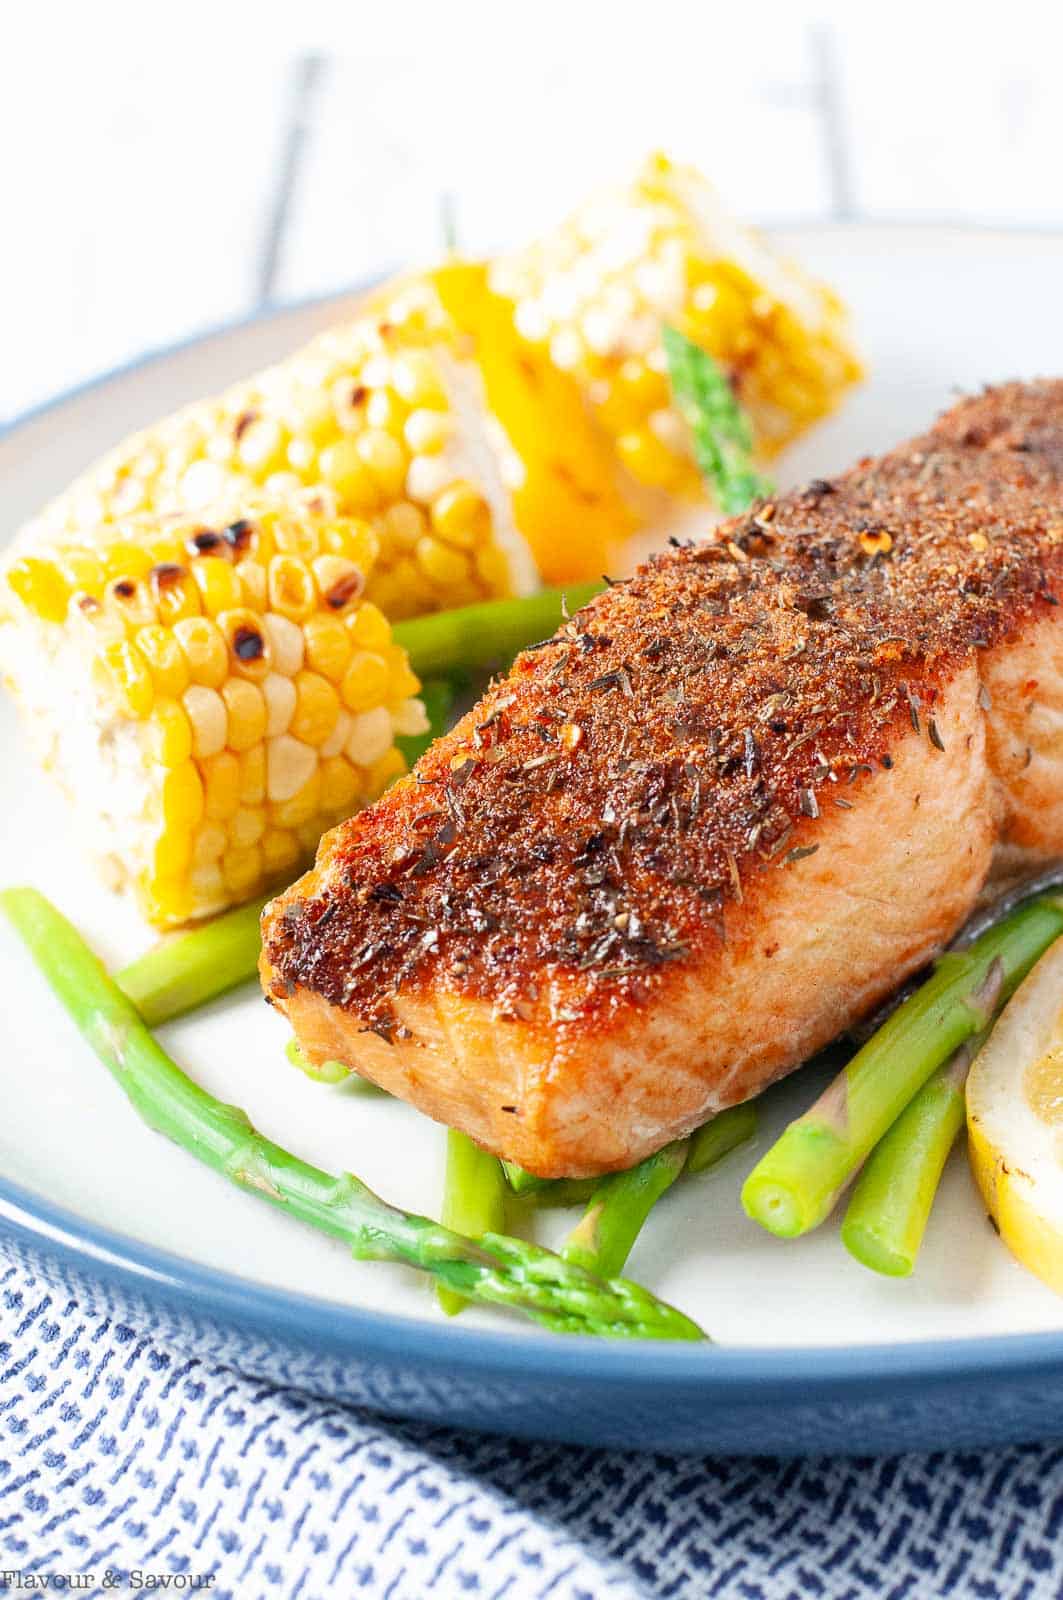 Close up view of Cajun spiced salmon fillet with corn on the cob.